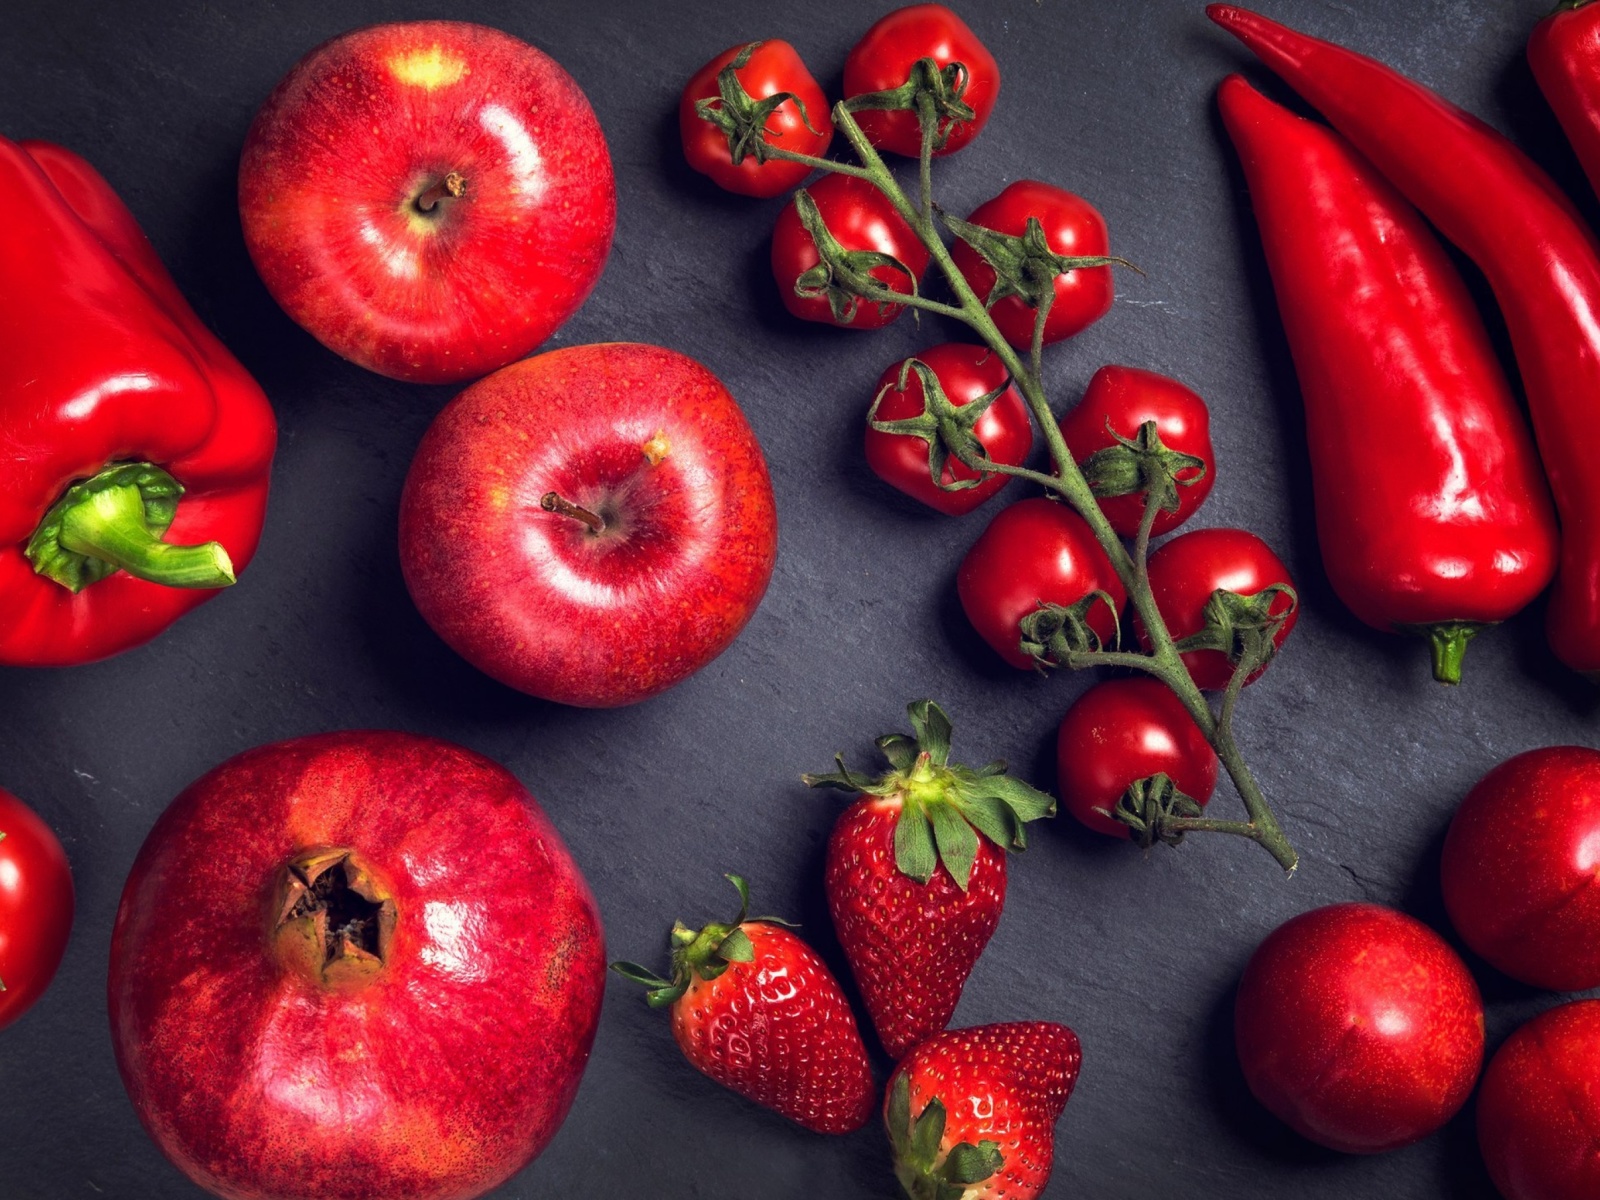 Red fruits and vegetables wallpaper 1600x1200